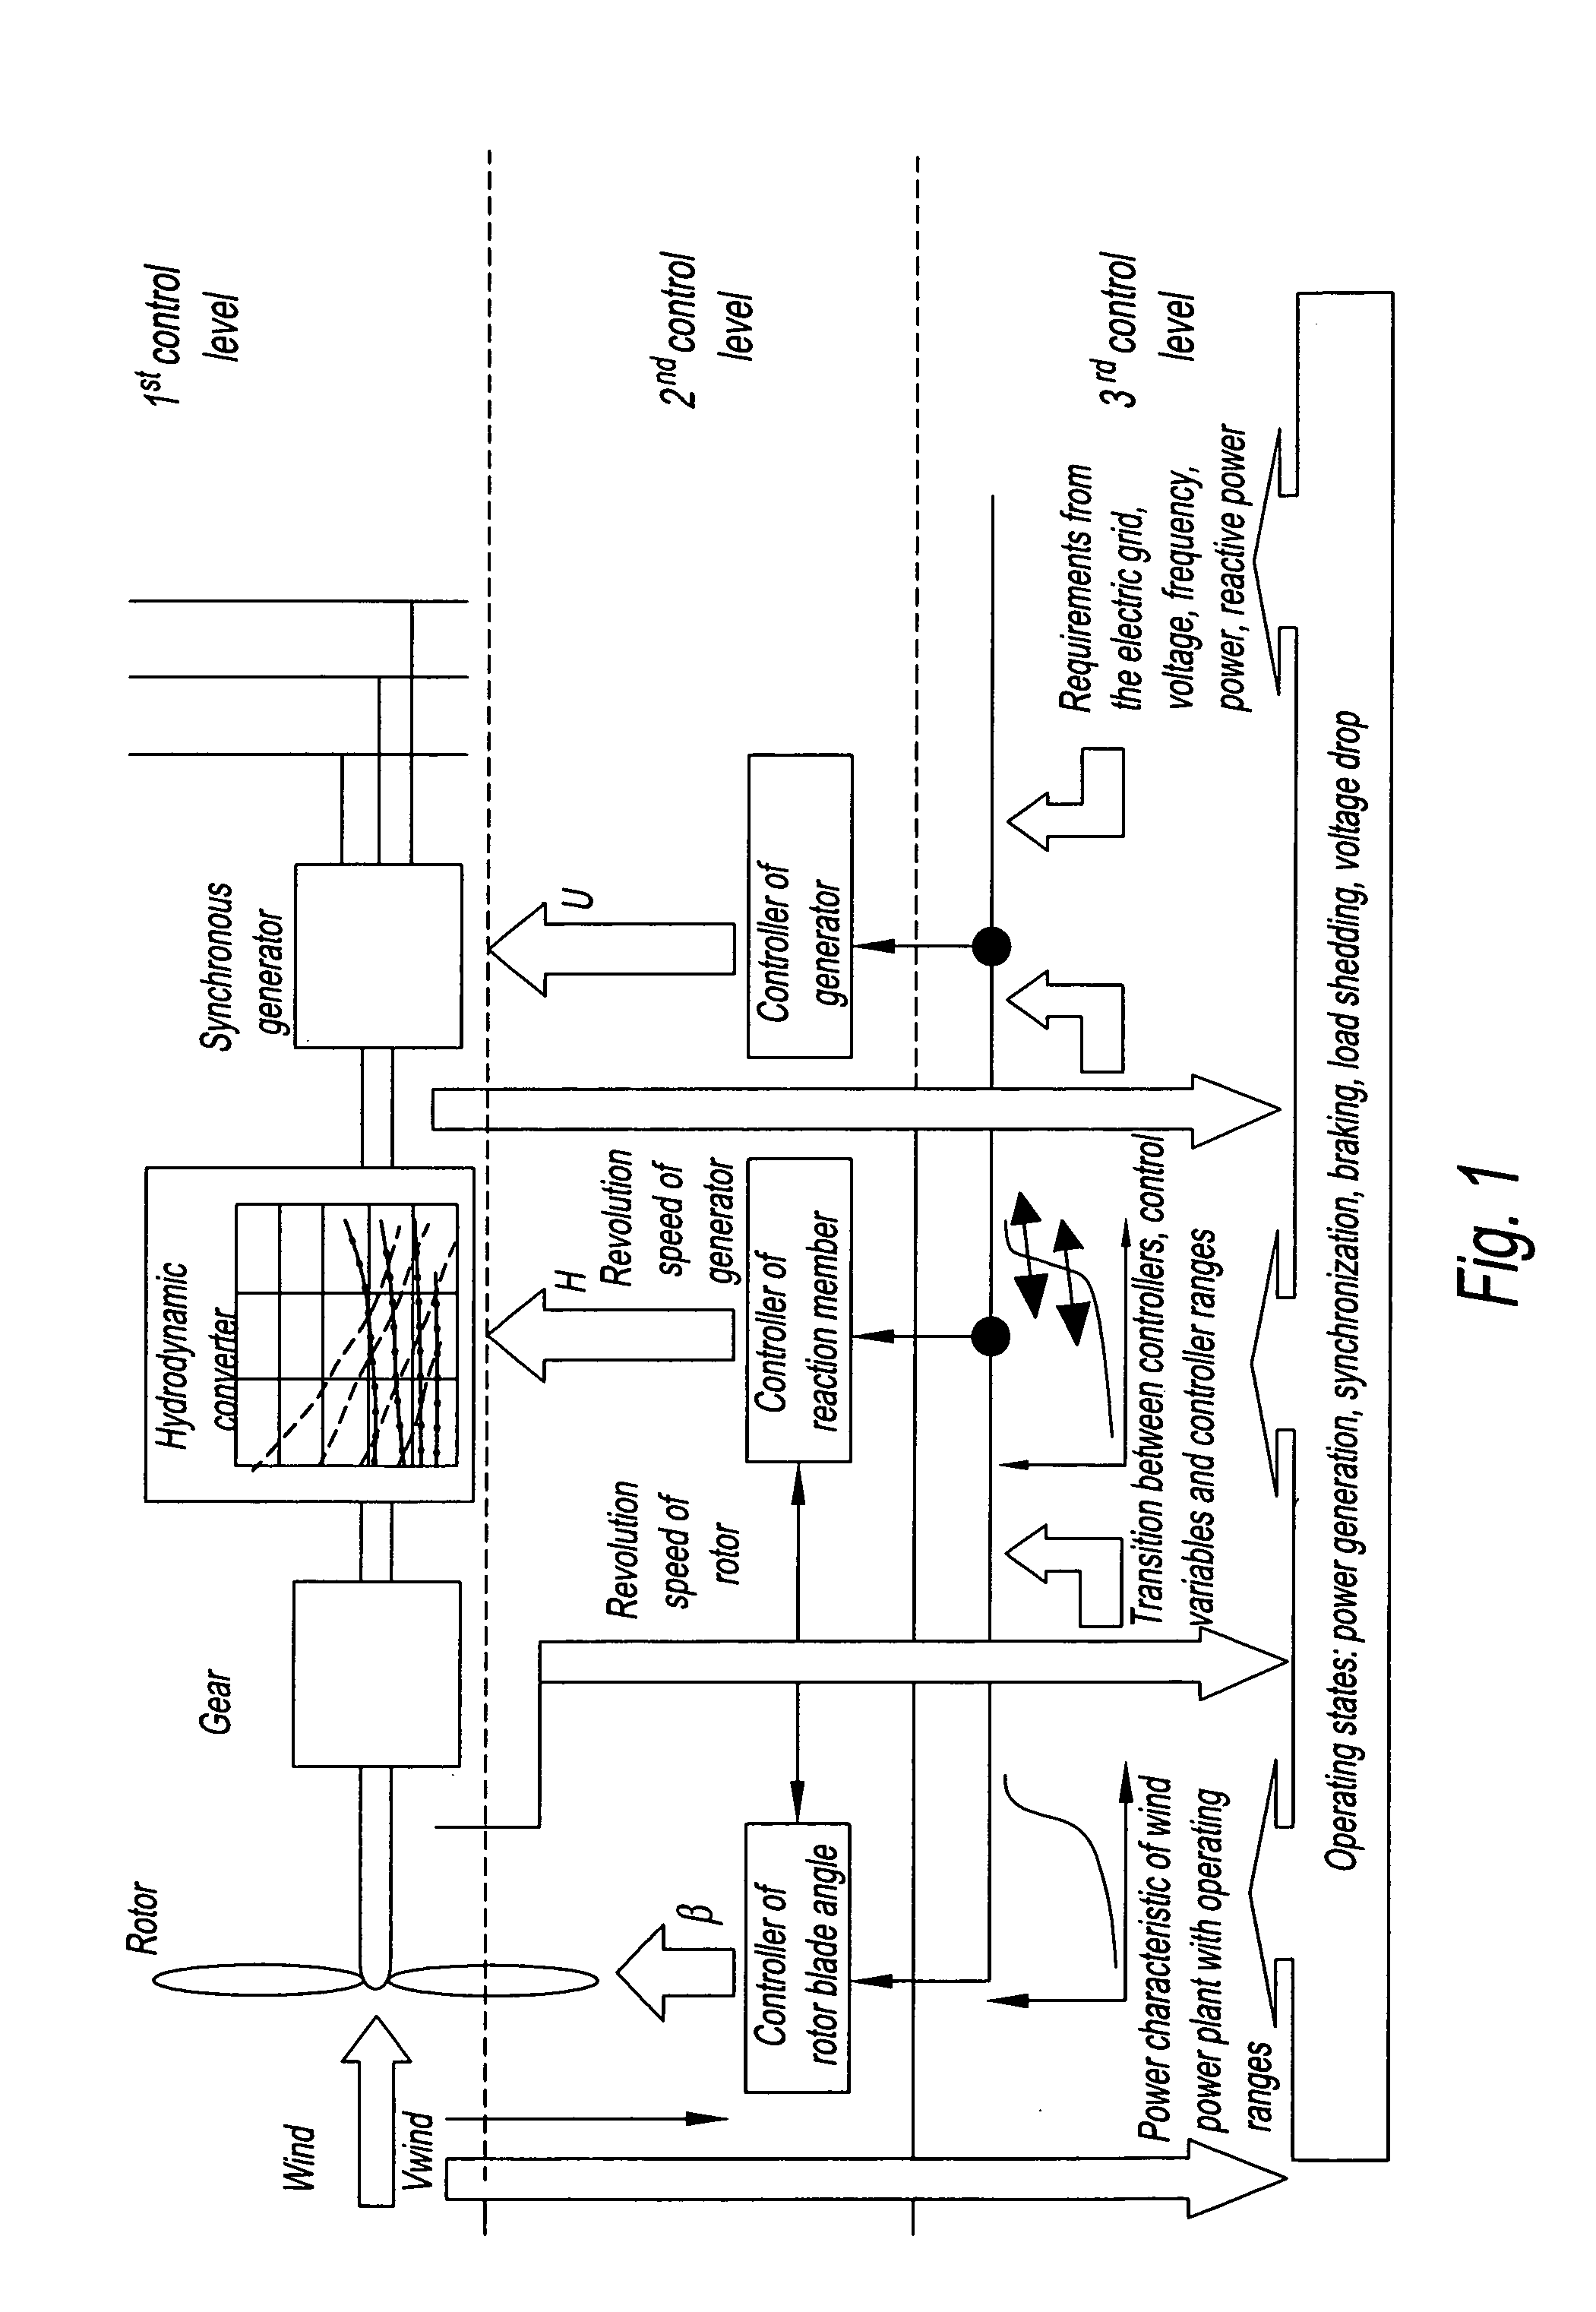 Control system for a wind power plant with hydrodynamic gear